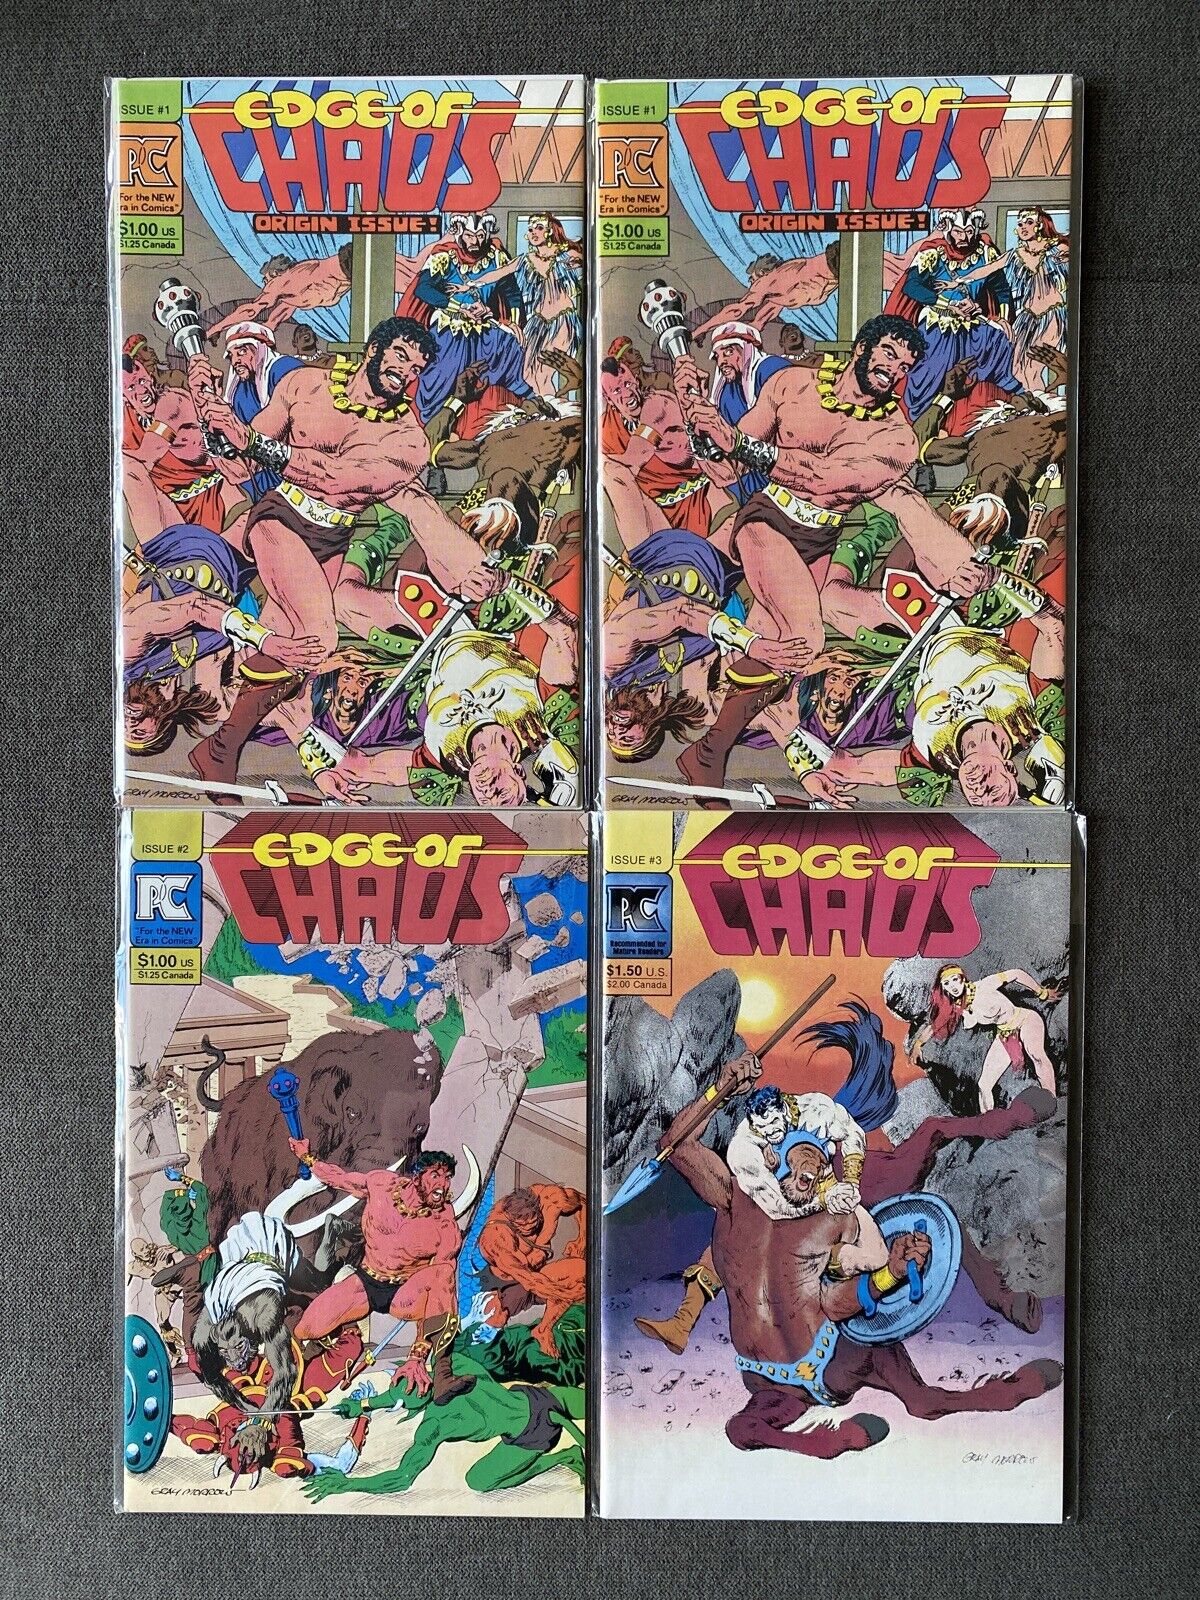 Edge Of Chaos #1-3 (2 Copies Of #1) Pacific Comics 1983 Lot Of 4